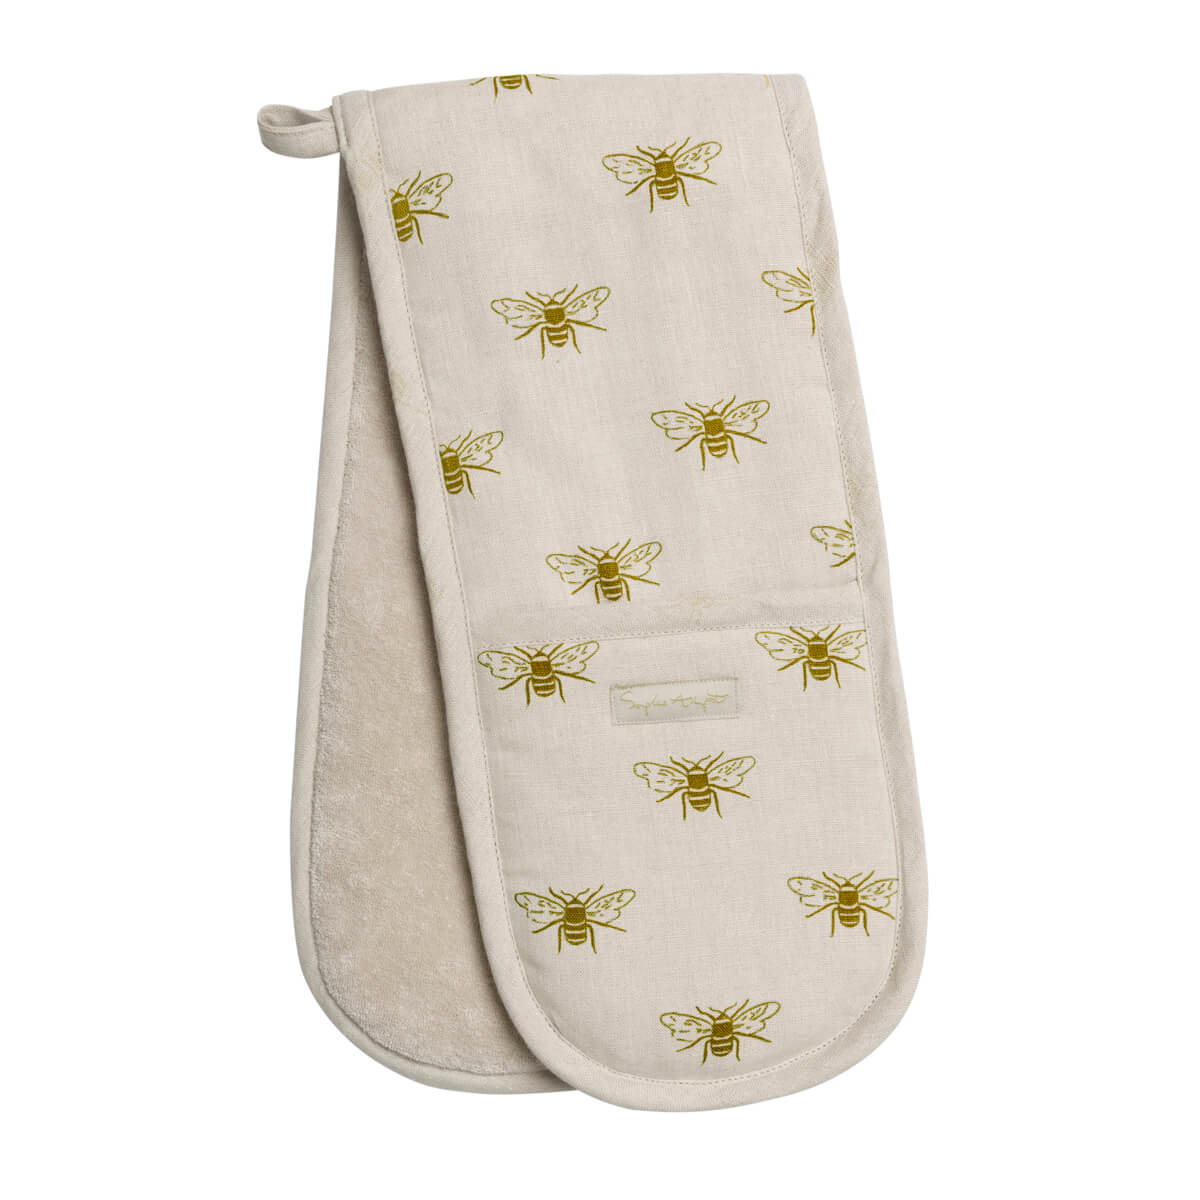 Double oven glove made from 100% linen with Sophie Allport Bees design on a neutral background